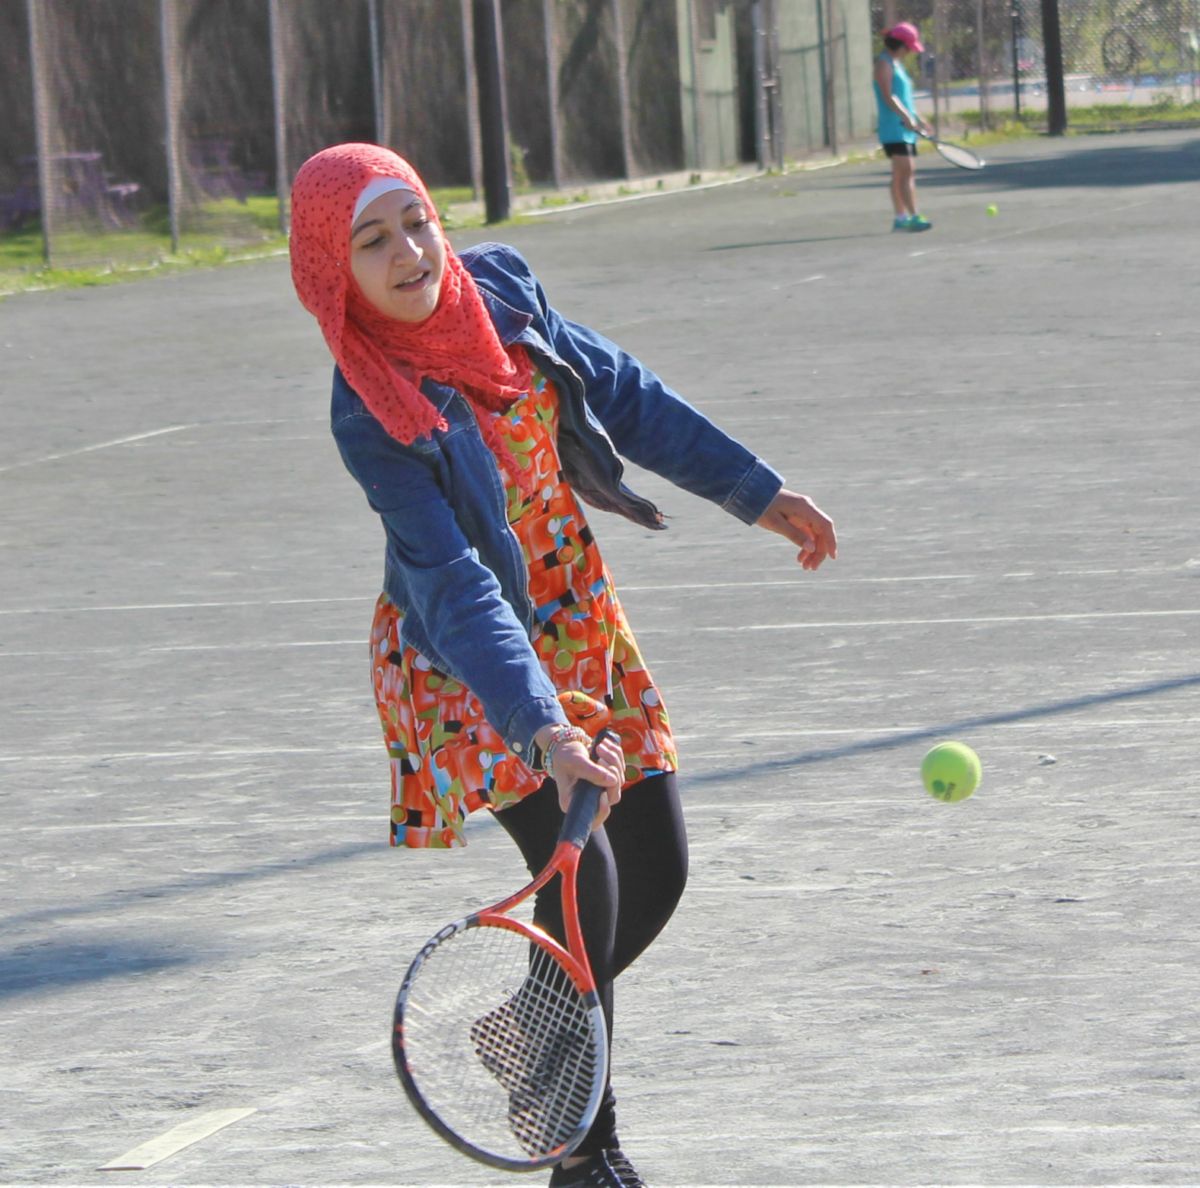 A young newcomer attempts to hit a tennis ball